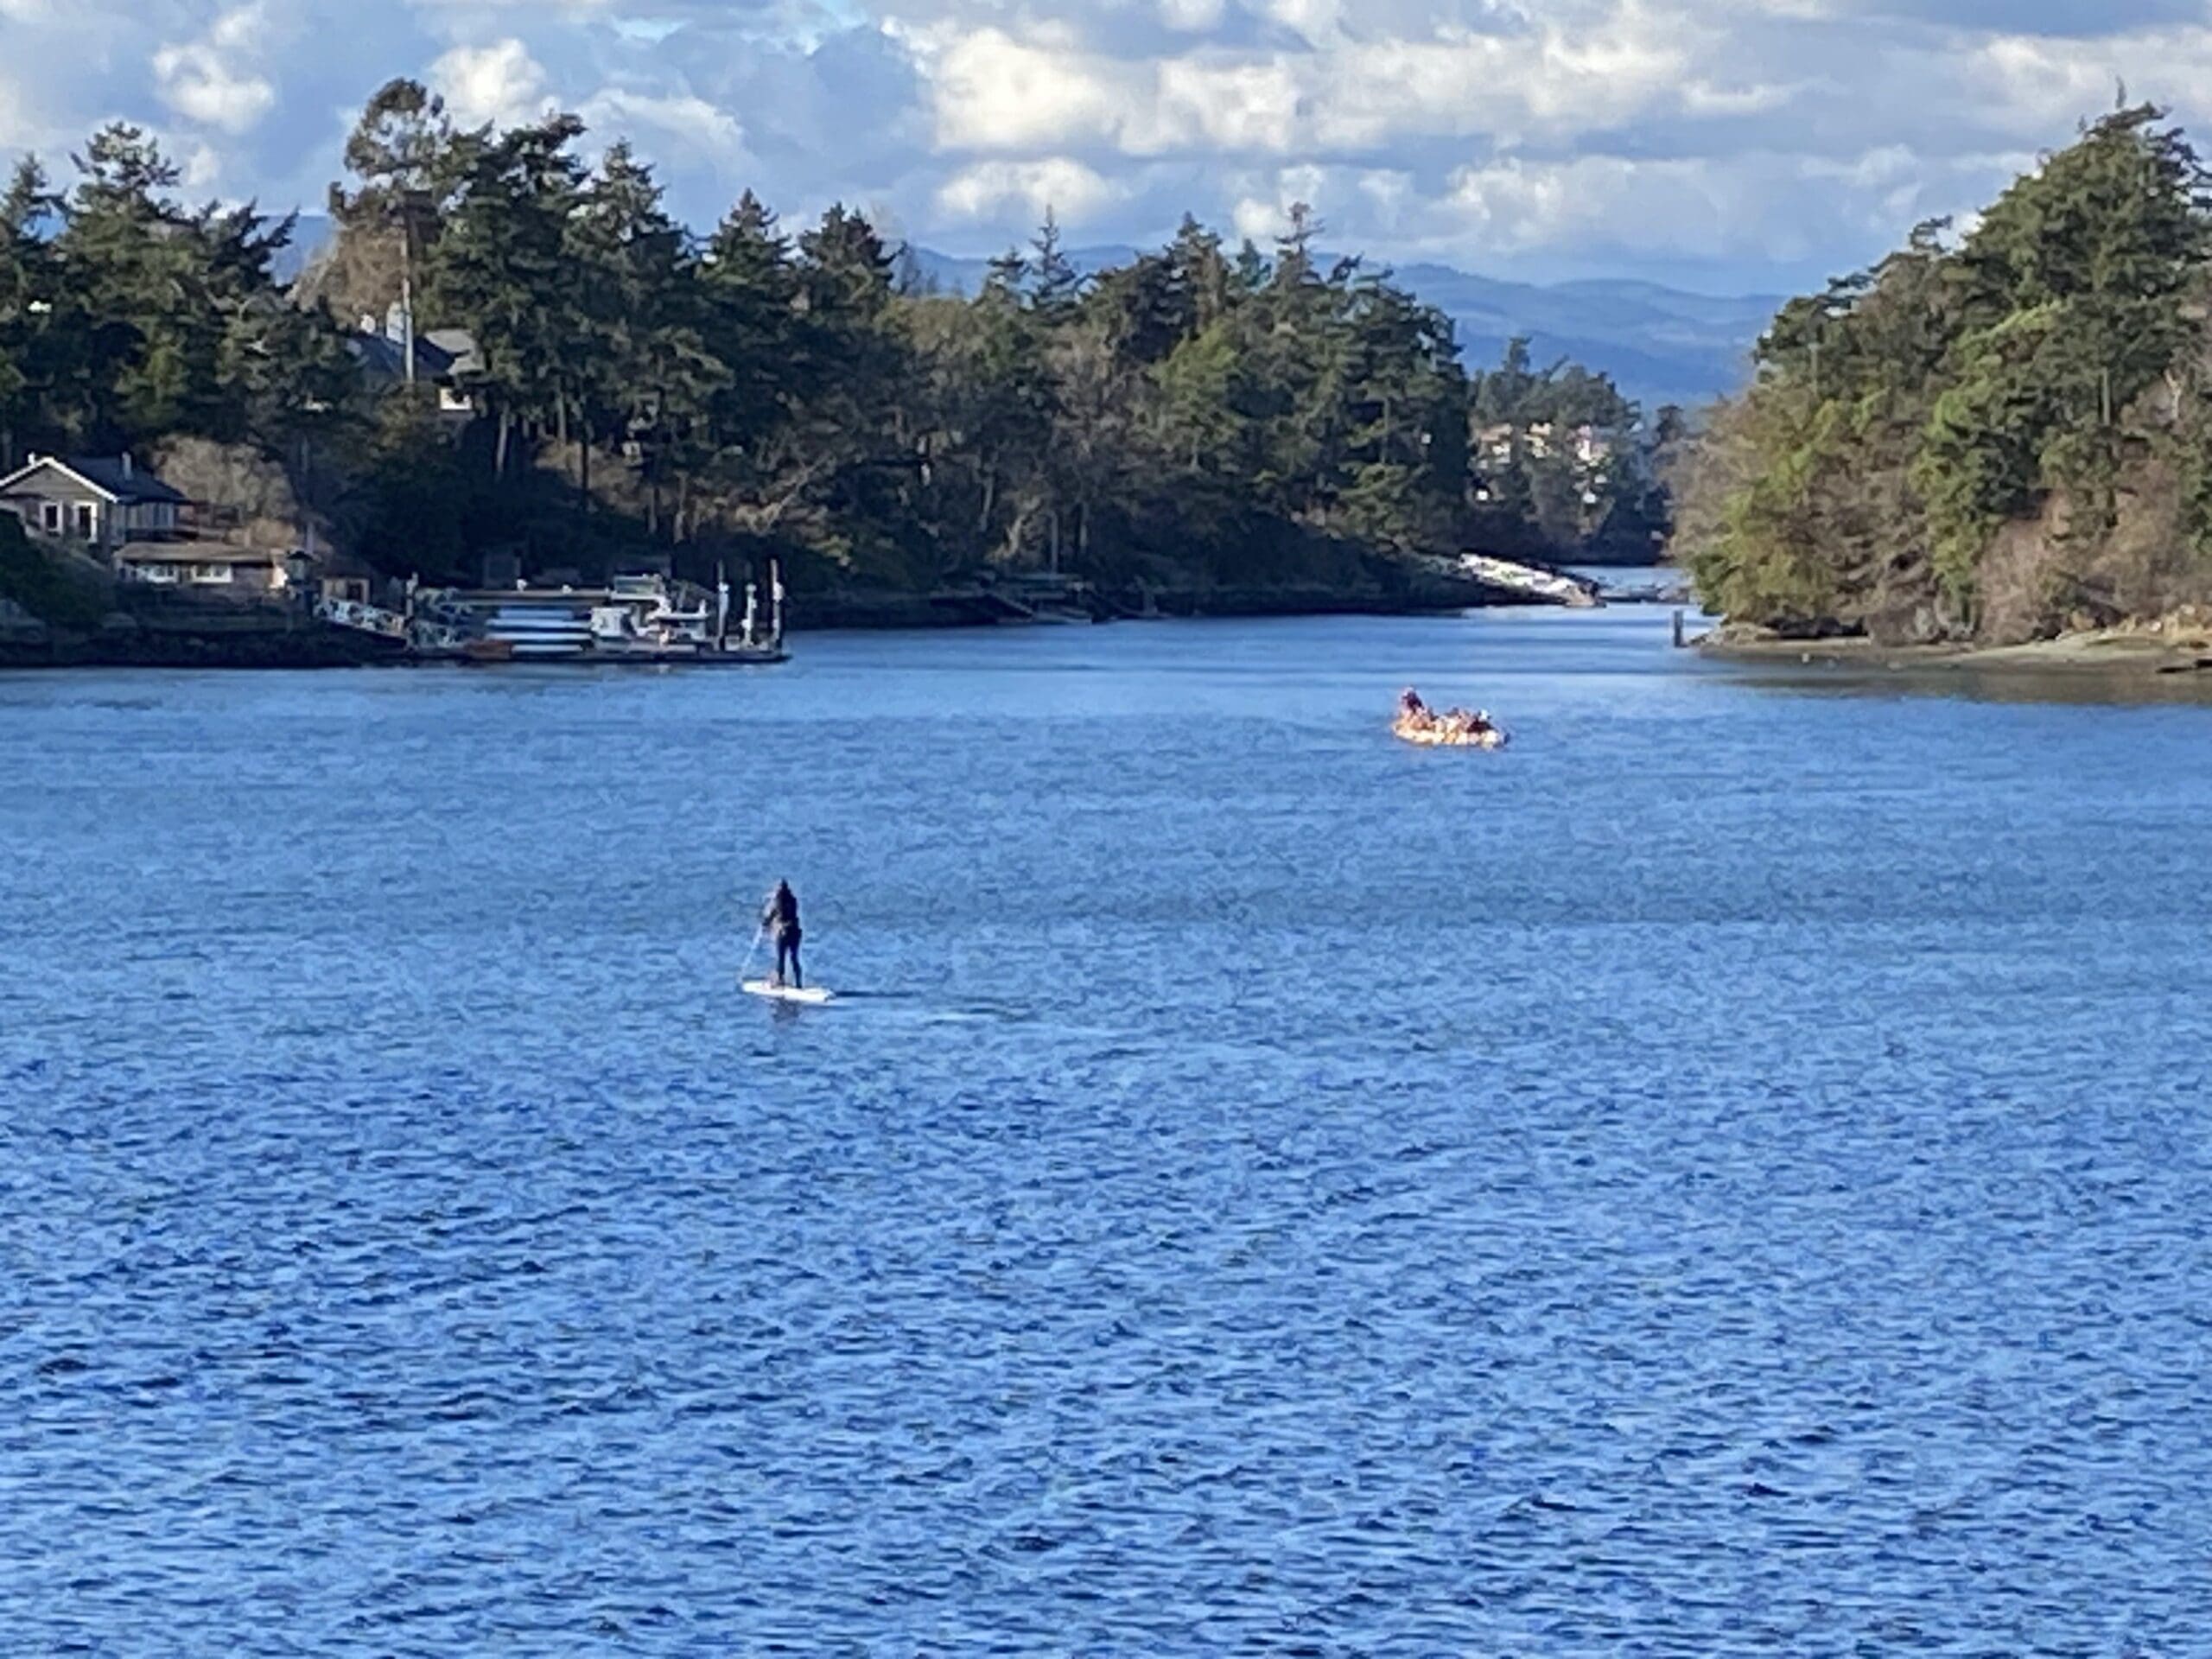 Stand up Paddle Boarding is a fun water activity while in Victoria BC.